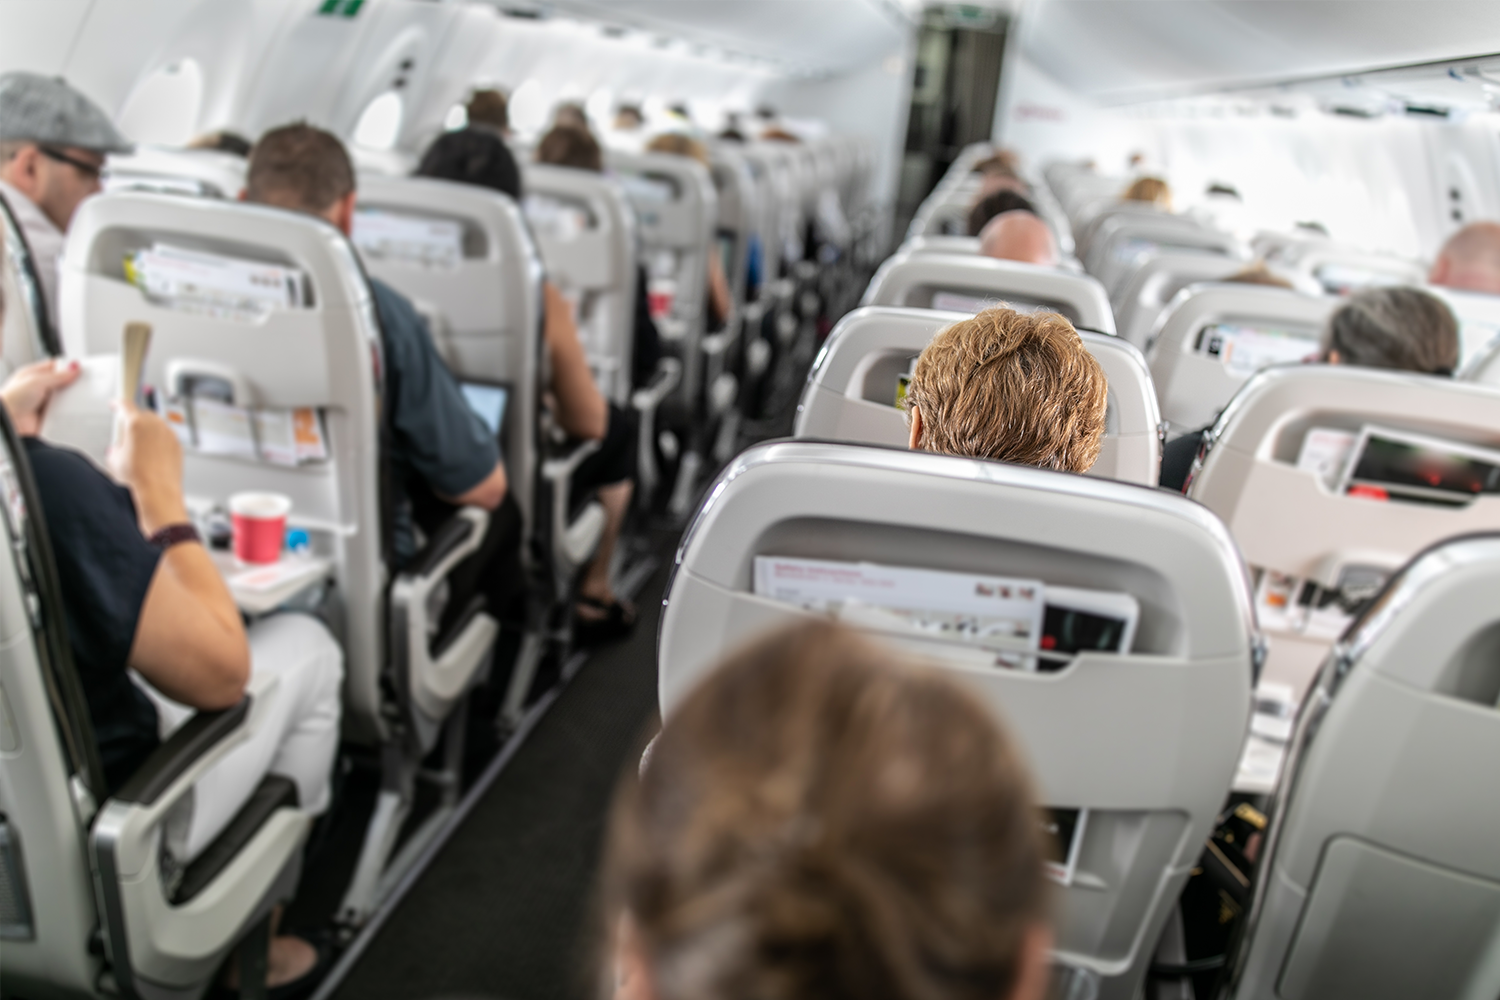 The Largest-Ever Penalties for Bad Behavior on a Flight Have Been Proposed